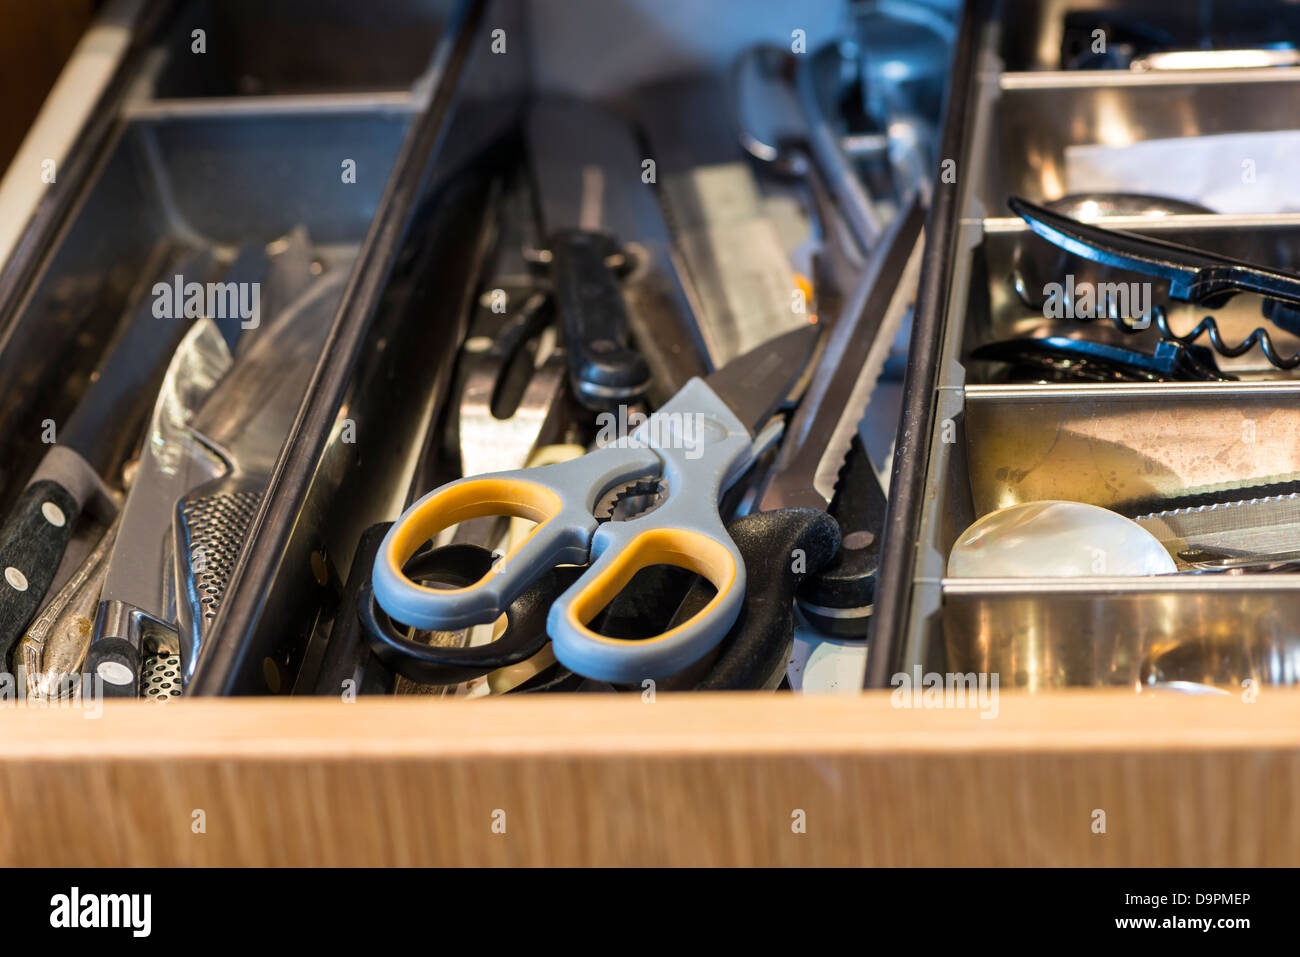 A kitchen drawer containing sharp objects dangerous for children Stock Photo